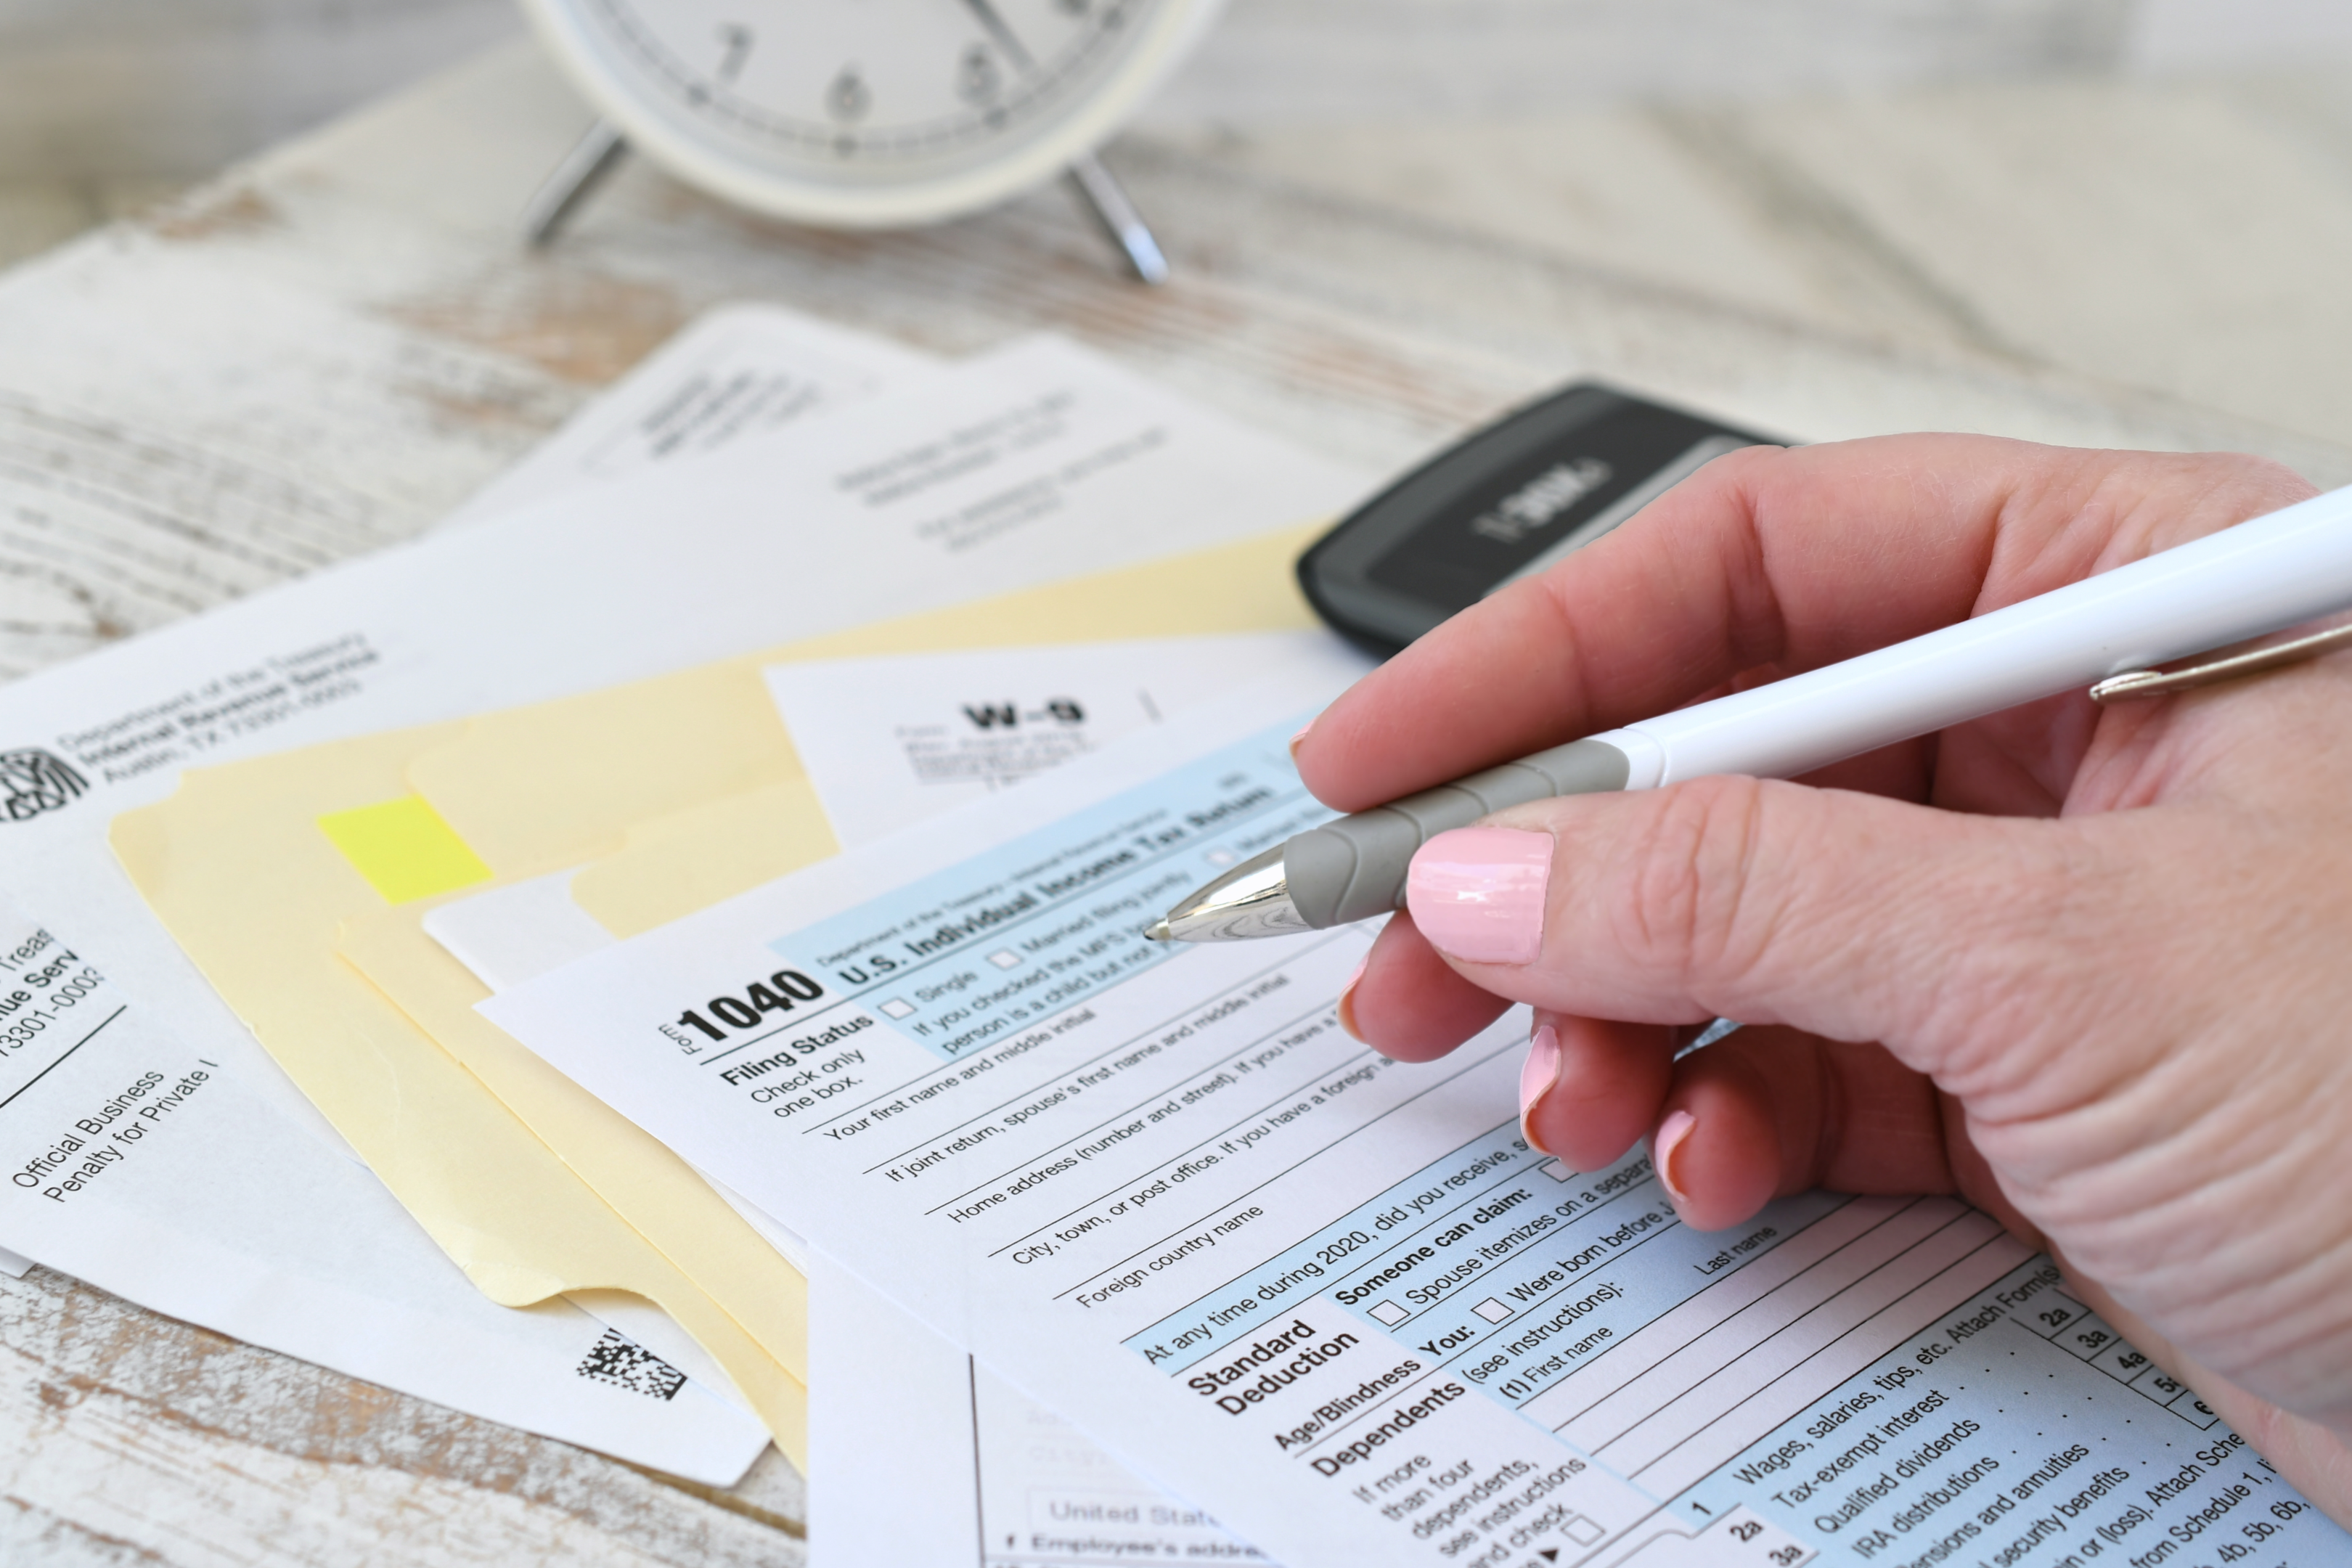 If you fail to pay taxes on time, the IRS may enforce tax penalties and interest